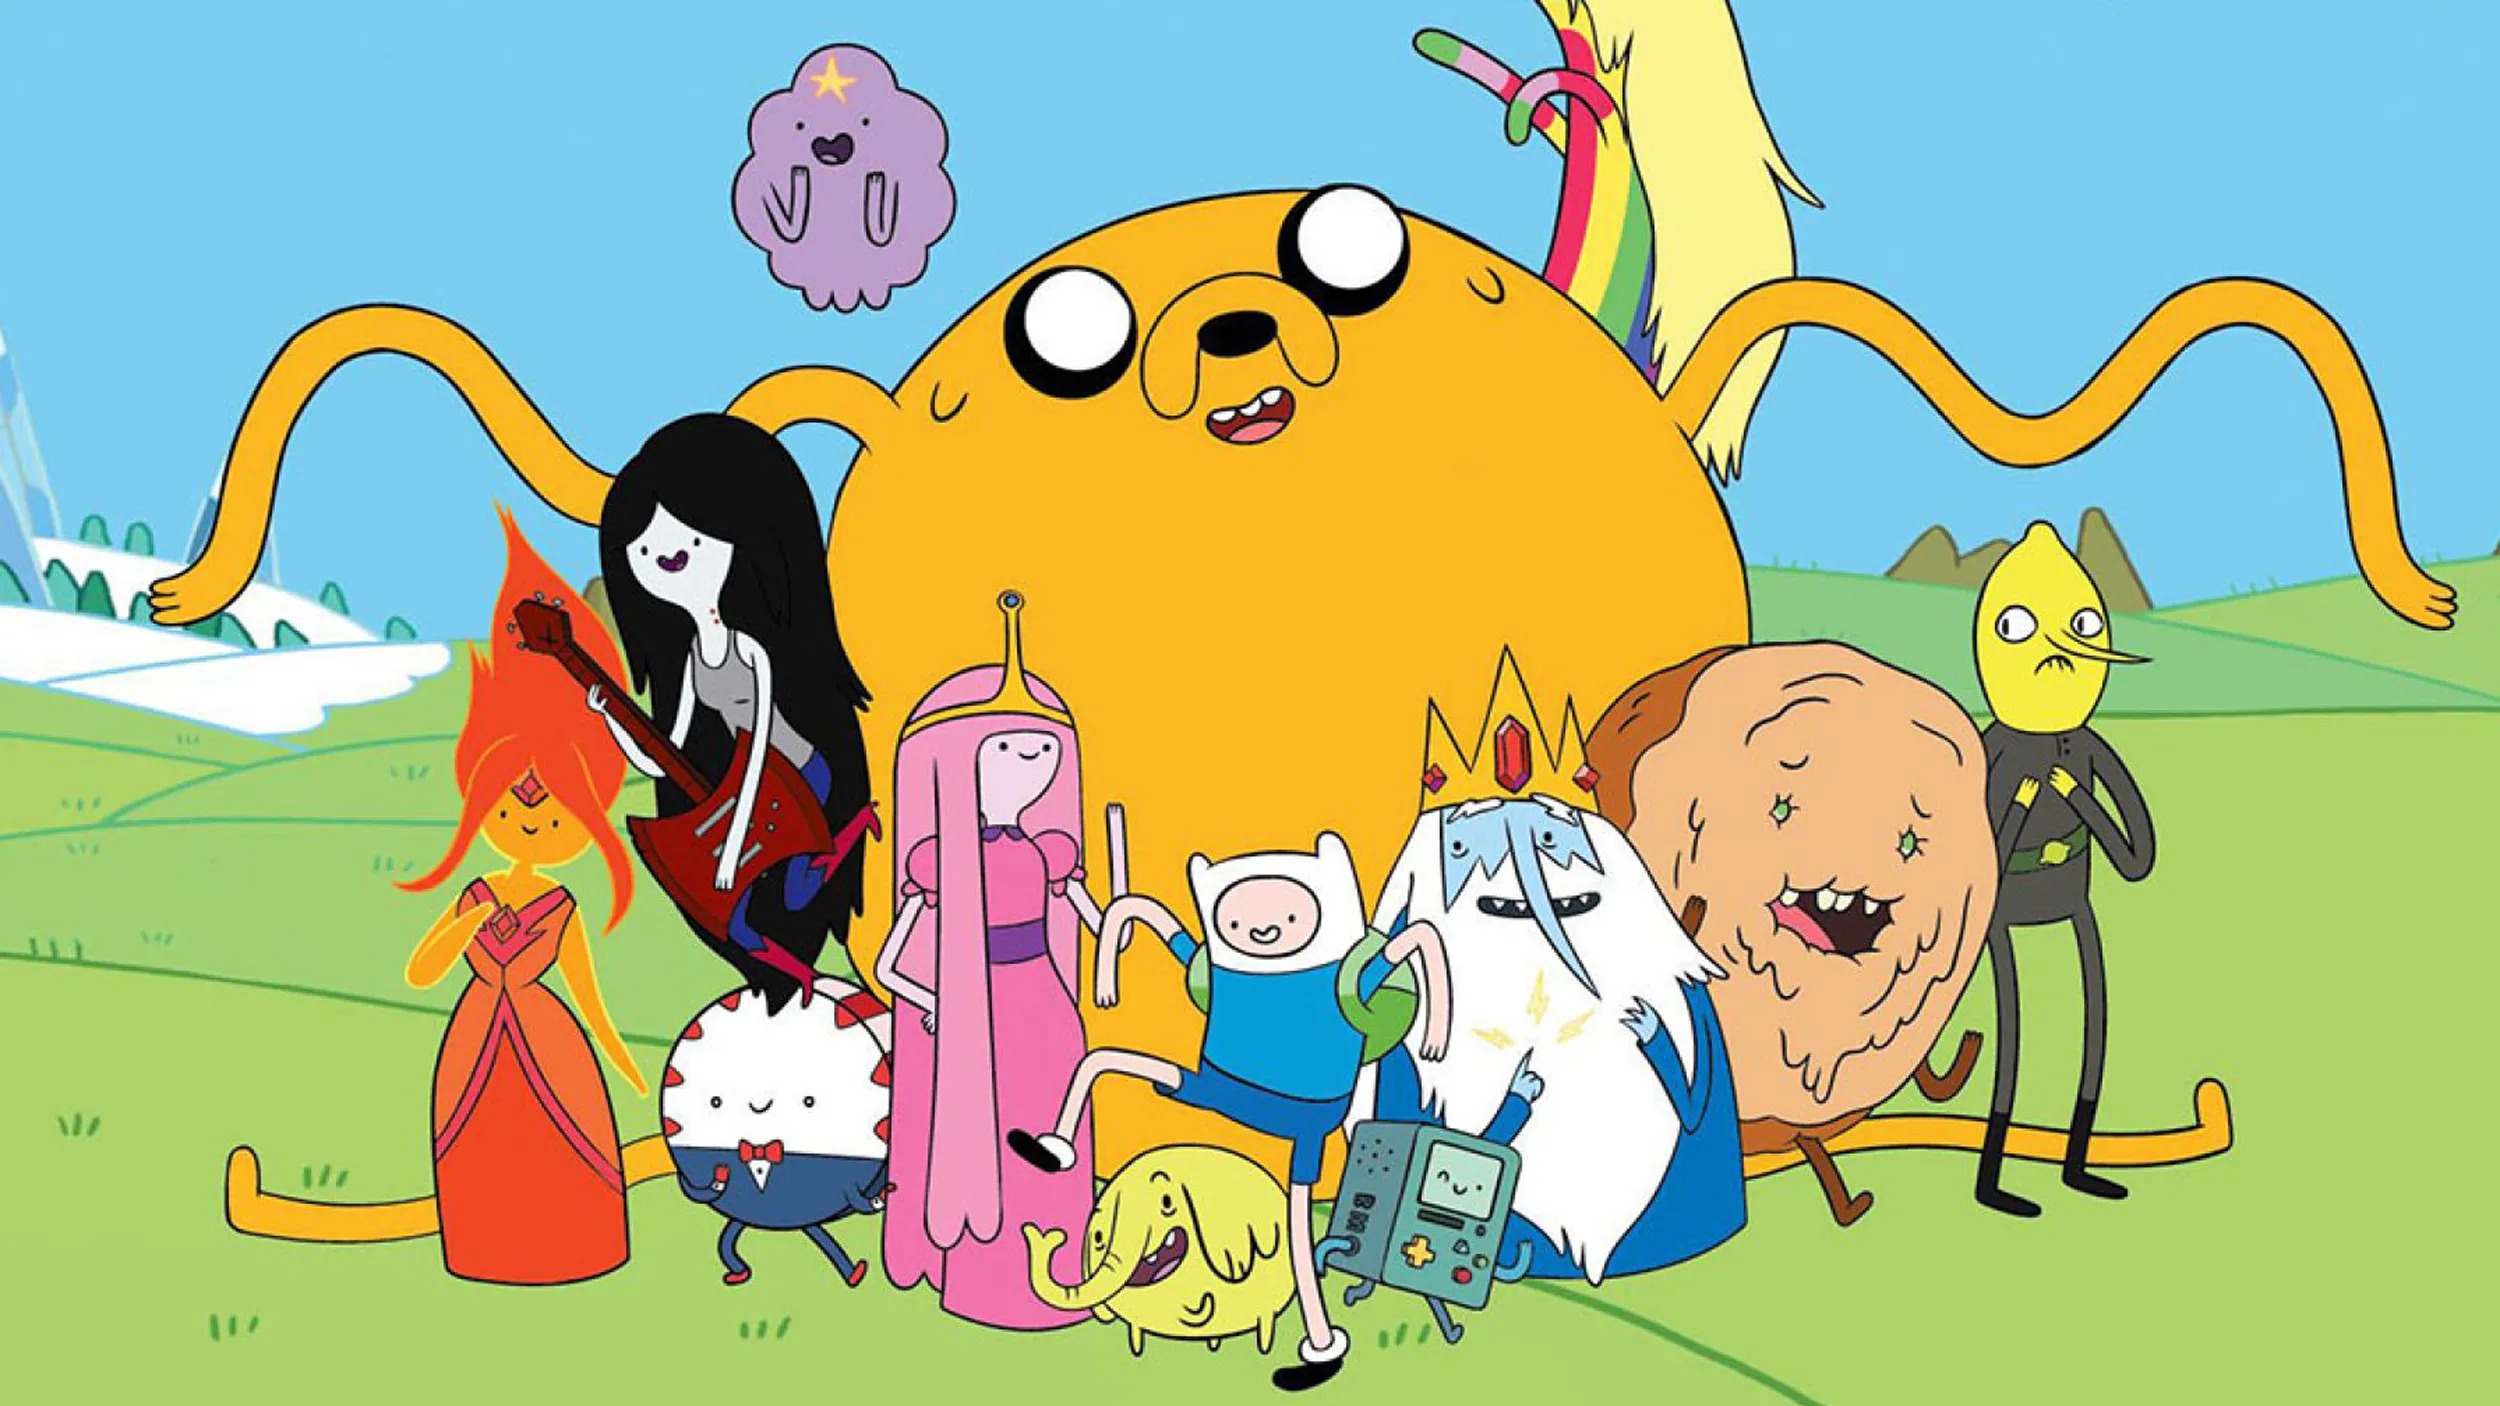 Adventure time was originally gonna be a Nickelodeon show. However Nickelodeon rejected the idea twice so the creators of adventure time went to CN and they said sure.